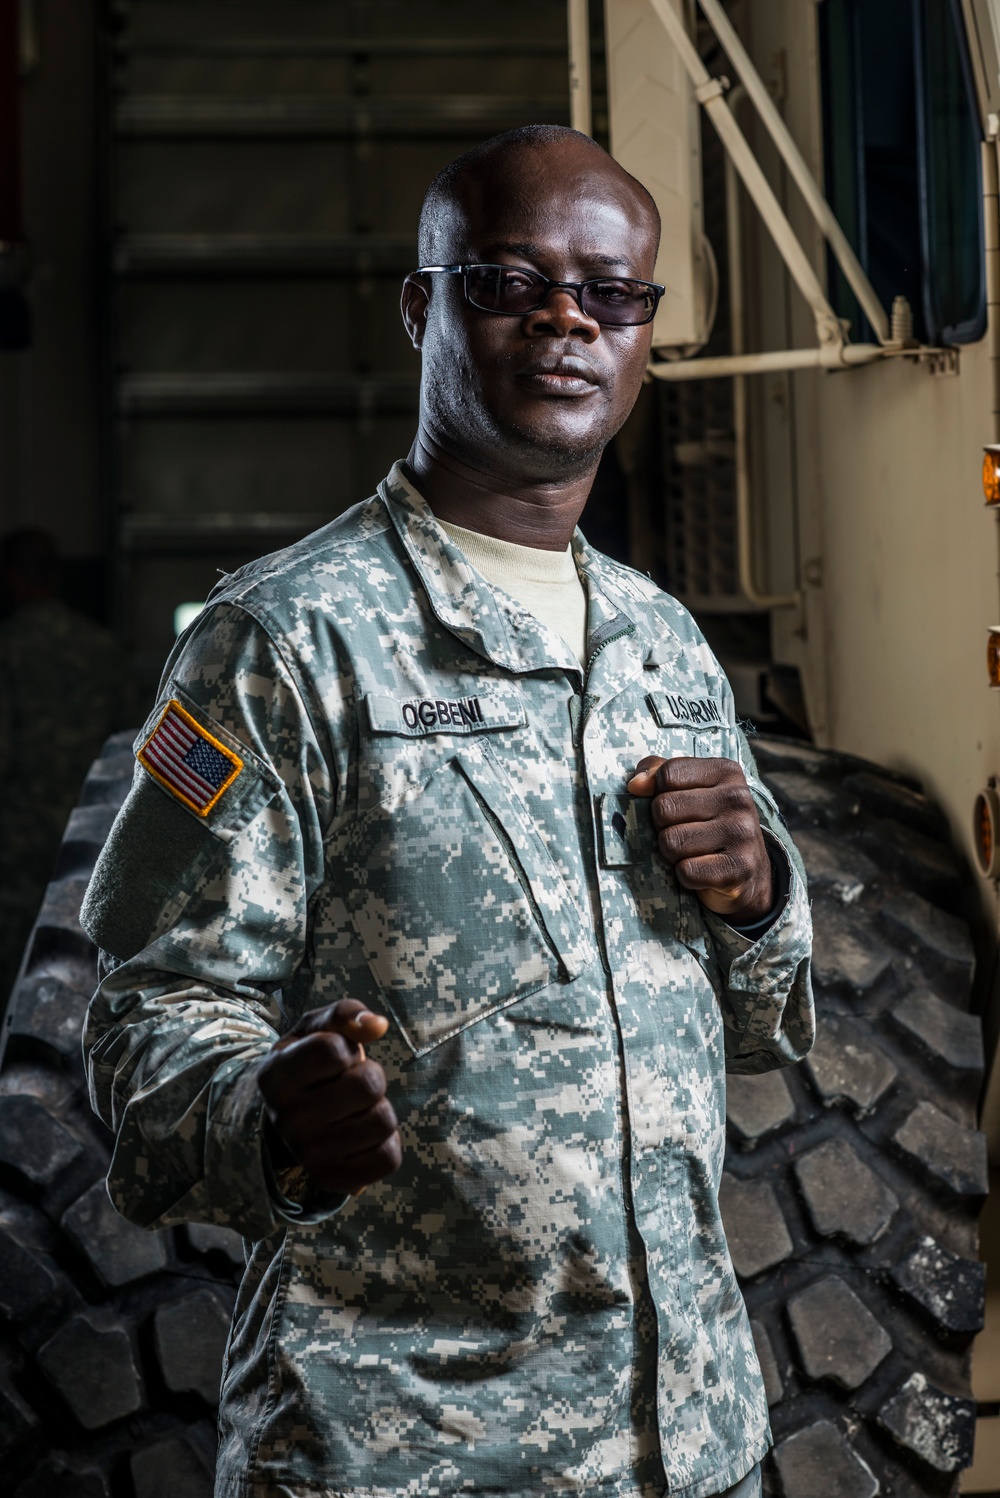 Army Reserve Soldiers' portraits